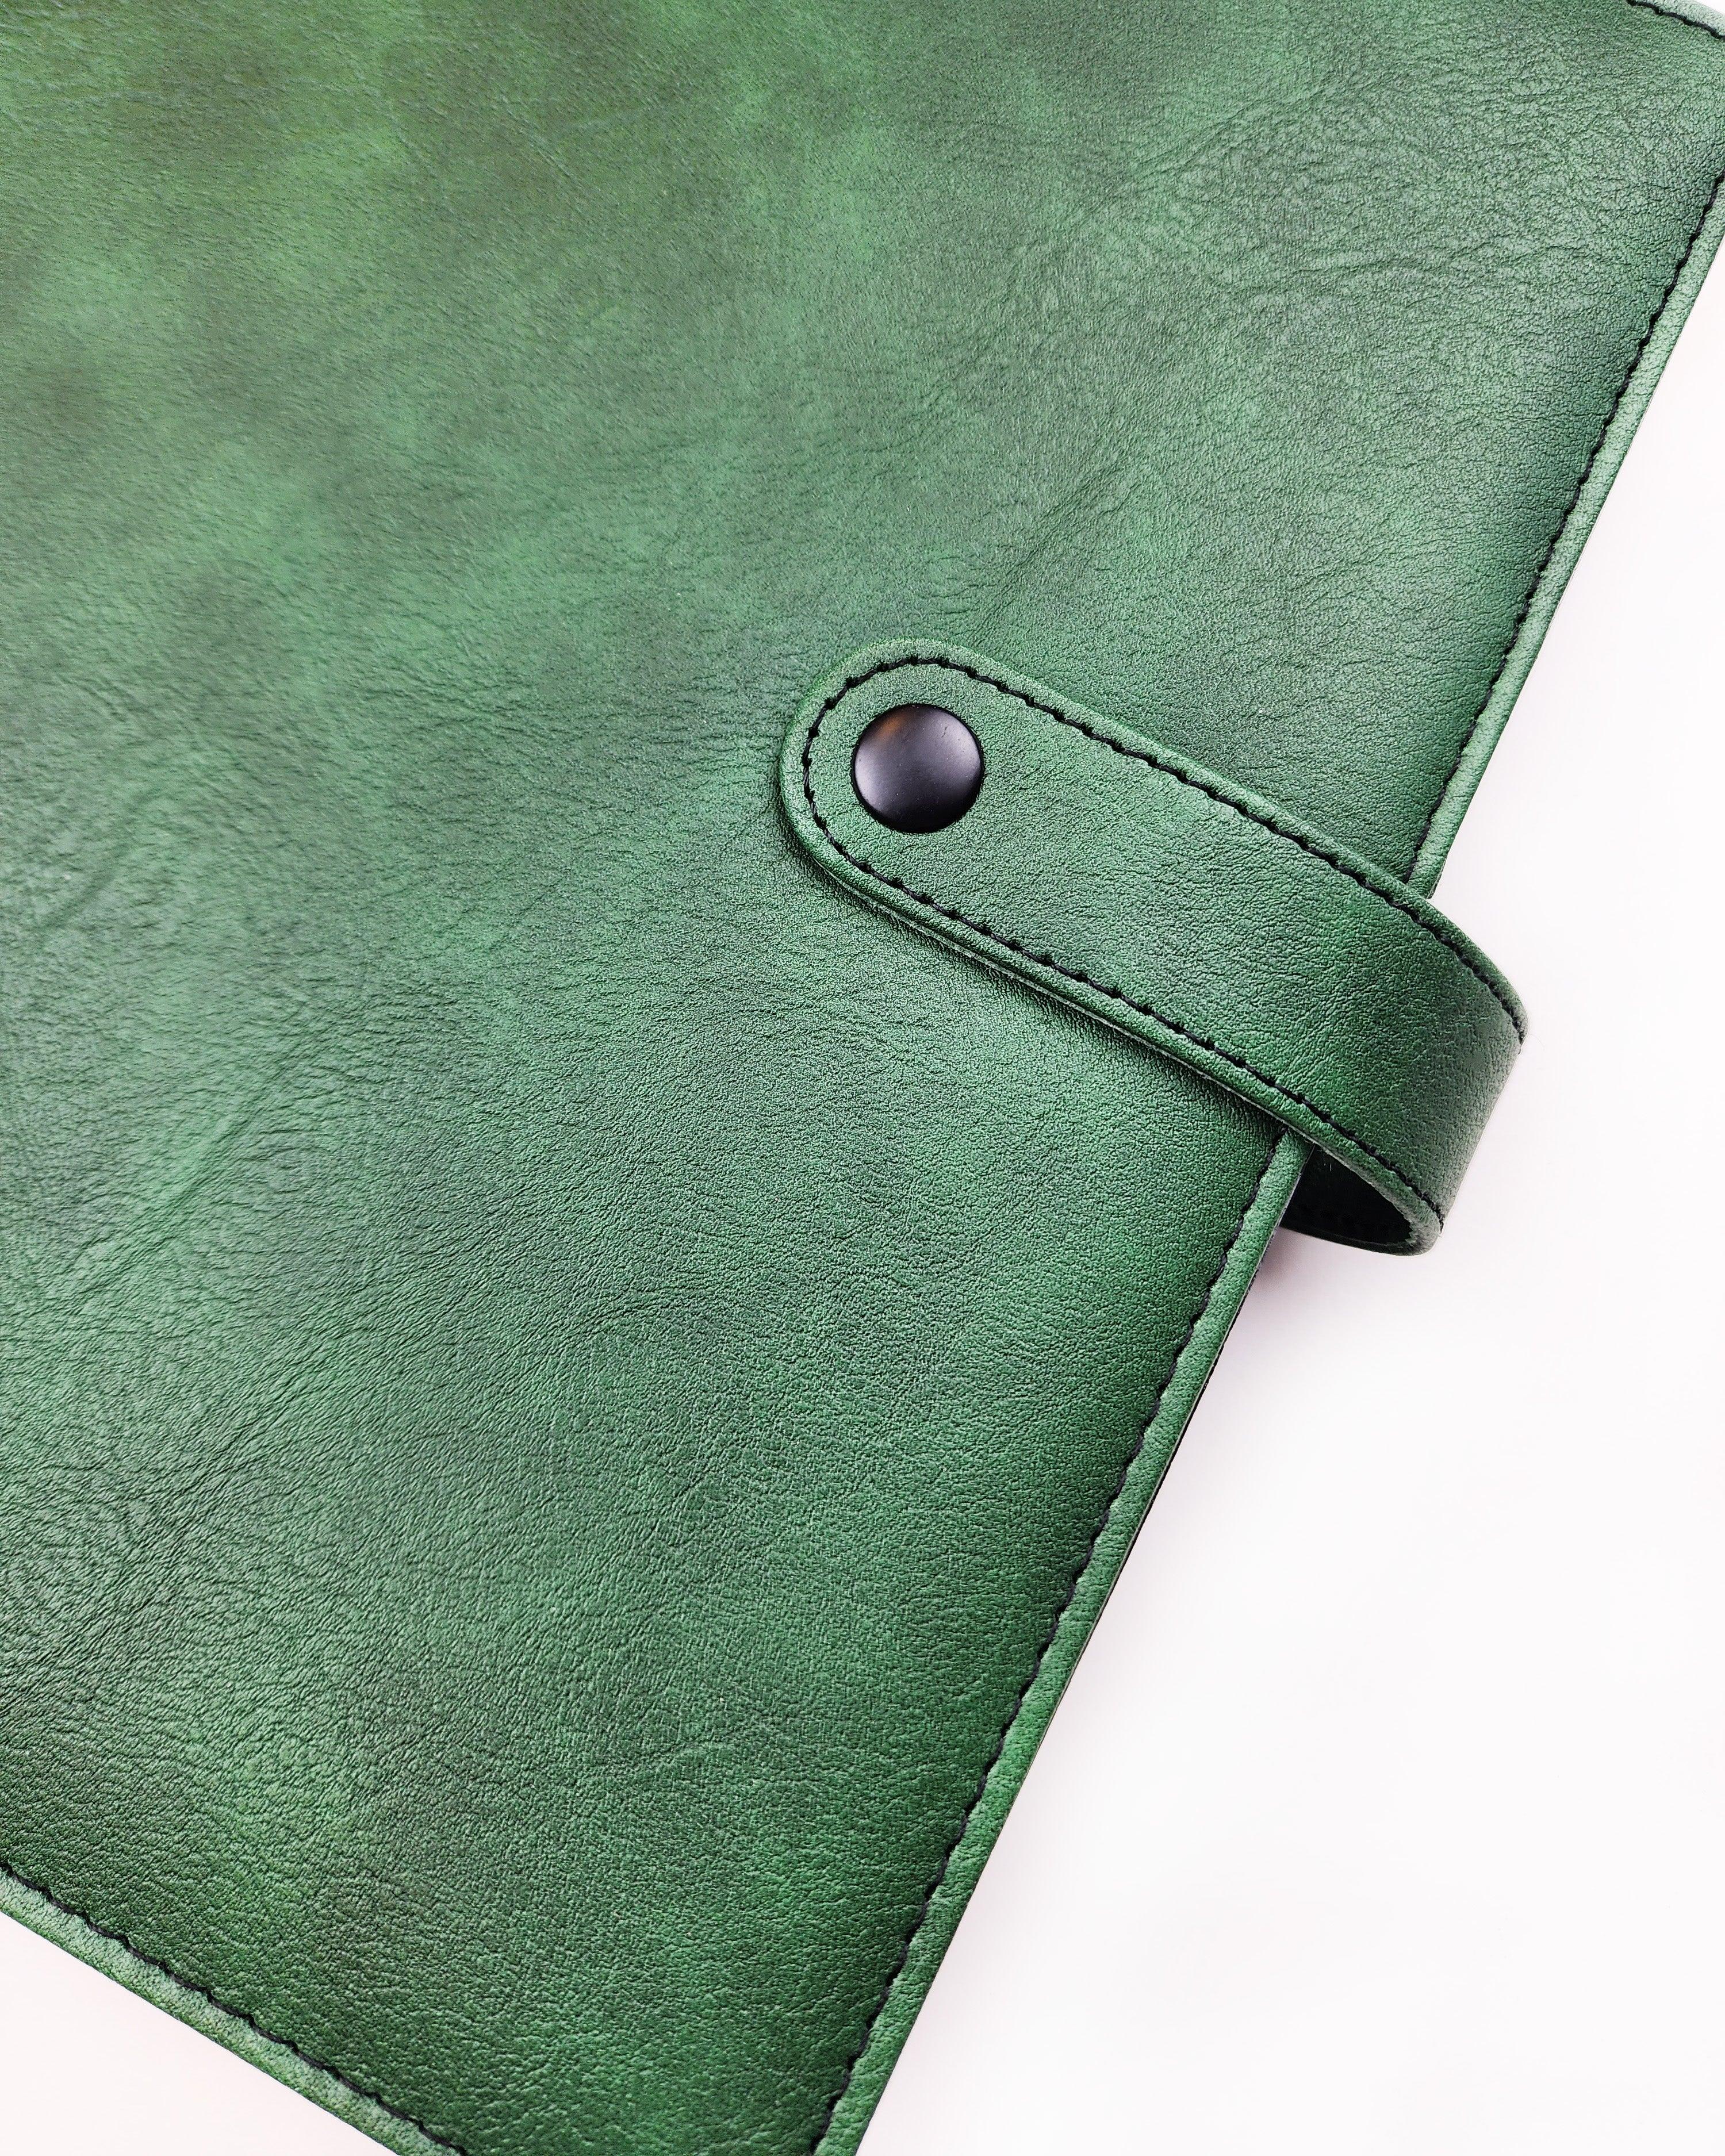 Green Wrap-around Vegan Leather Planner Cover folio for discbound planners by Janes Agenda.